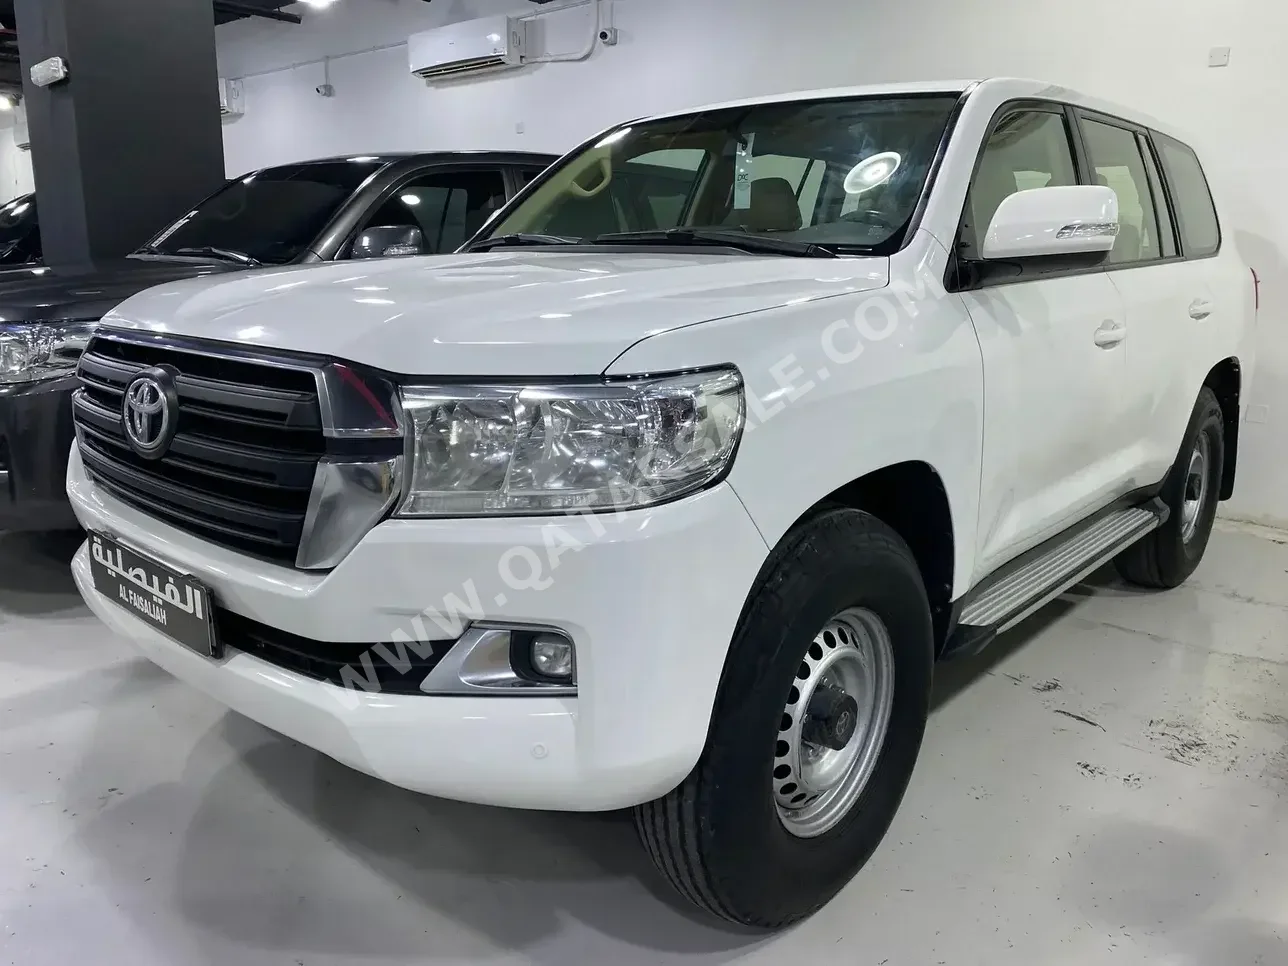 Toyota  Land Cruiser  G  2017  Automatic  221,000 Km  6 Cylinder  Four Wheel Drive (4WD)  SUV  White